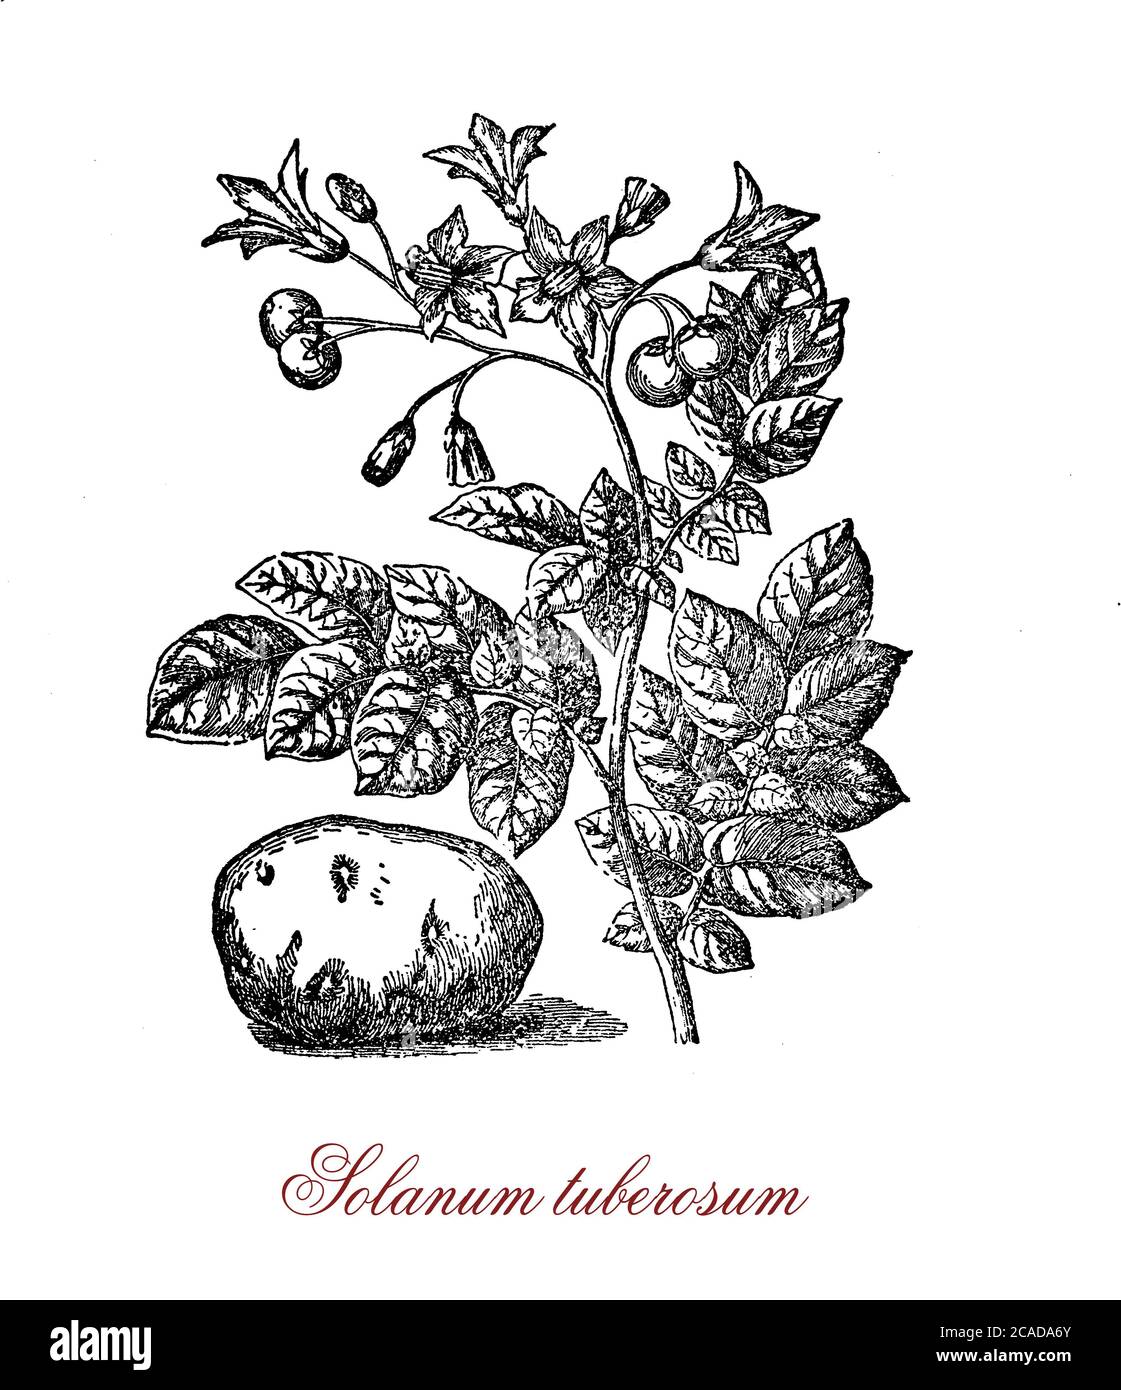 Vintage botanical engraving of potato,root vegetable native to the Americas, starchy tuber of solanum tuberosum plant introduced to Europe in 16th century as food supply. Stock Photo